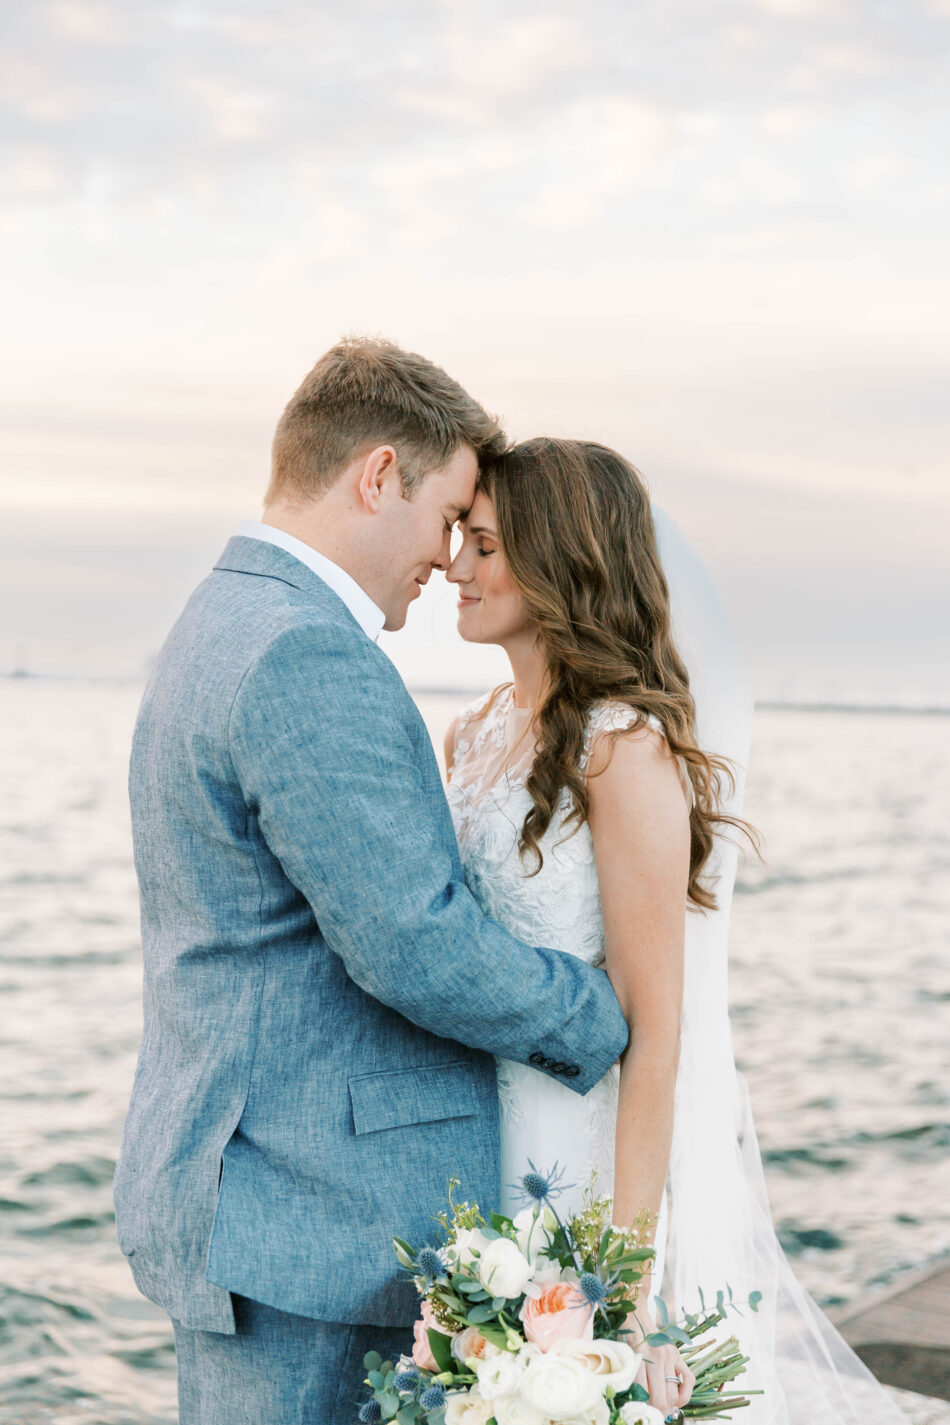 Newlywed Portraits at Charleston Harbor by the dock and water. Kate Timbers Photography. http://katetimbers.com #katetimbersphotography // Charleston Photography // Inspiration.